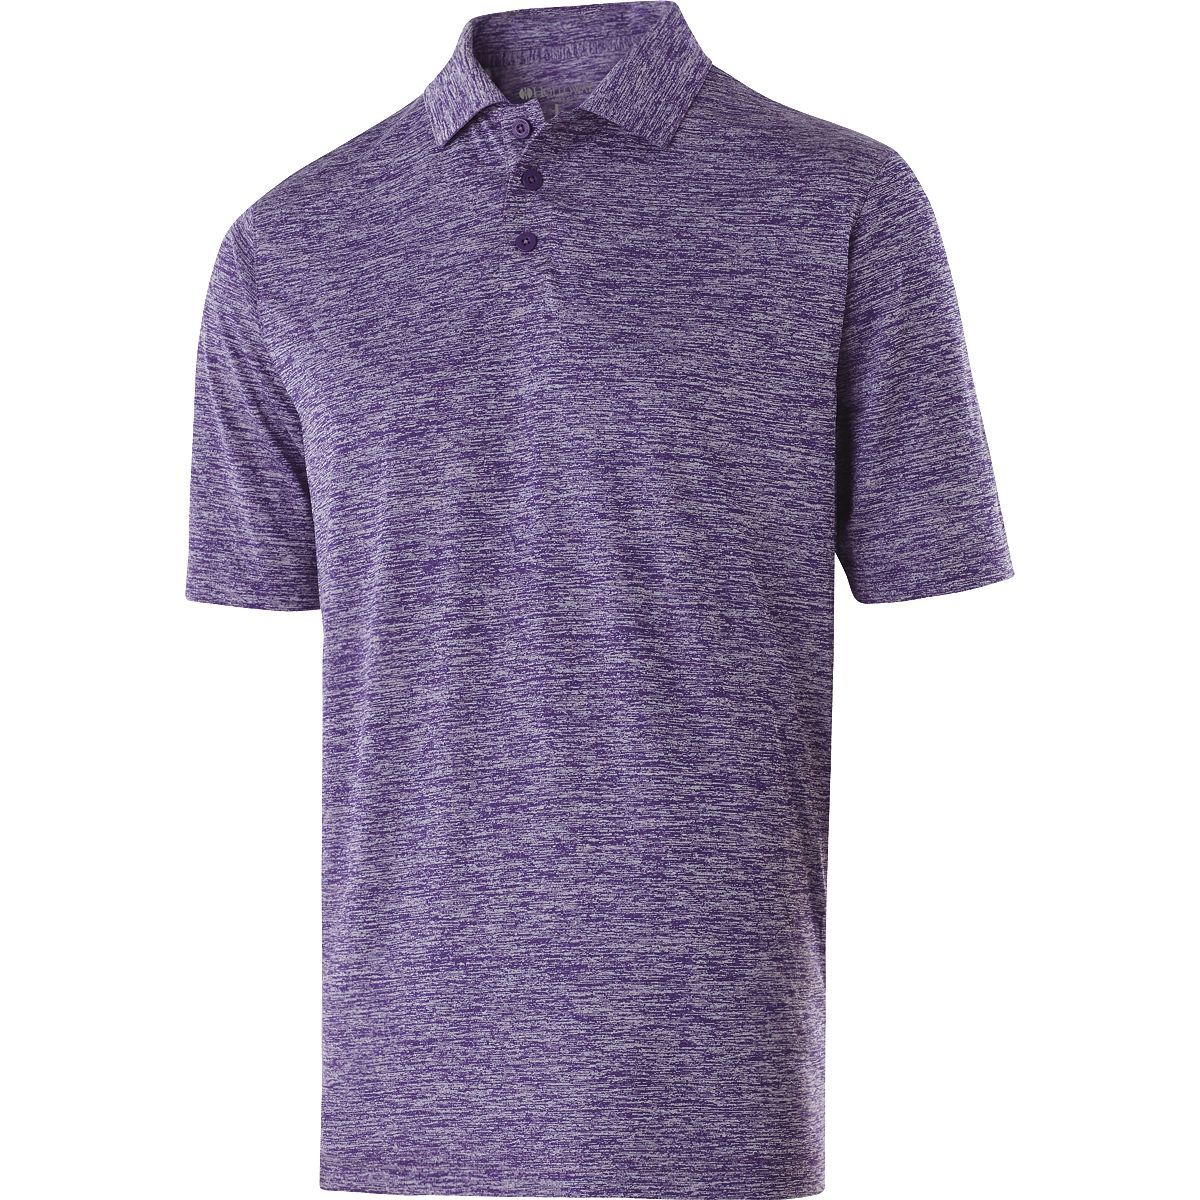 Holloway Electrify 2.0 Polo in Purple Heather  -Part of the Adult, Adult-Polos, Polos, Holloway, Shirts product lines at KanaleyCreations.com